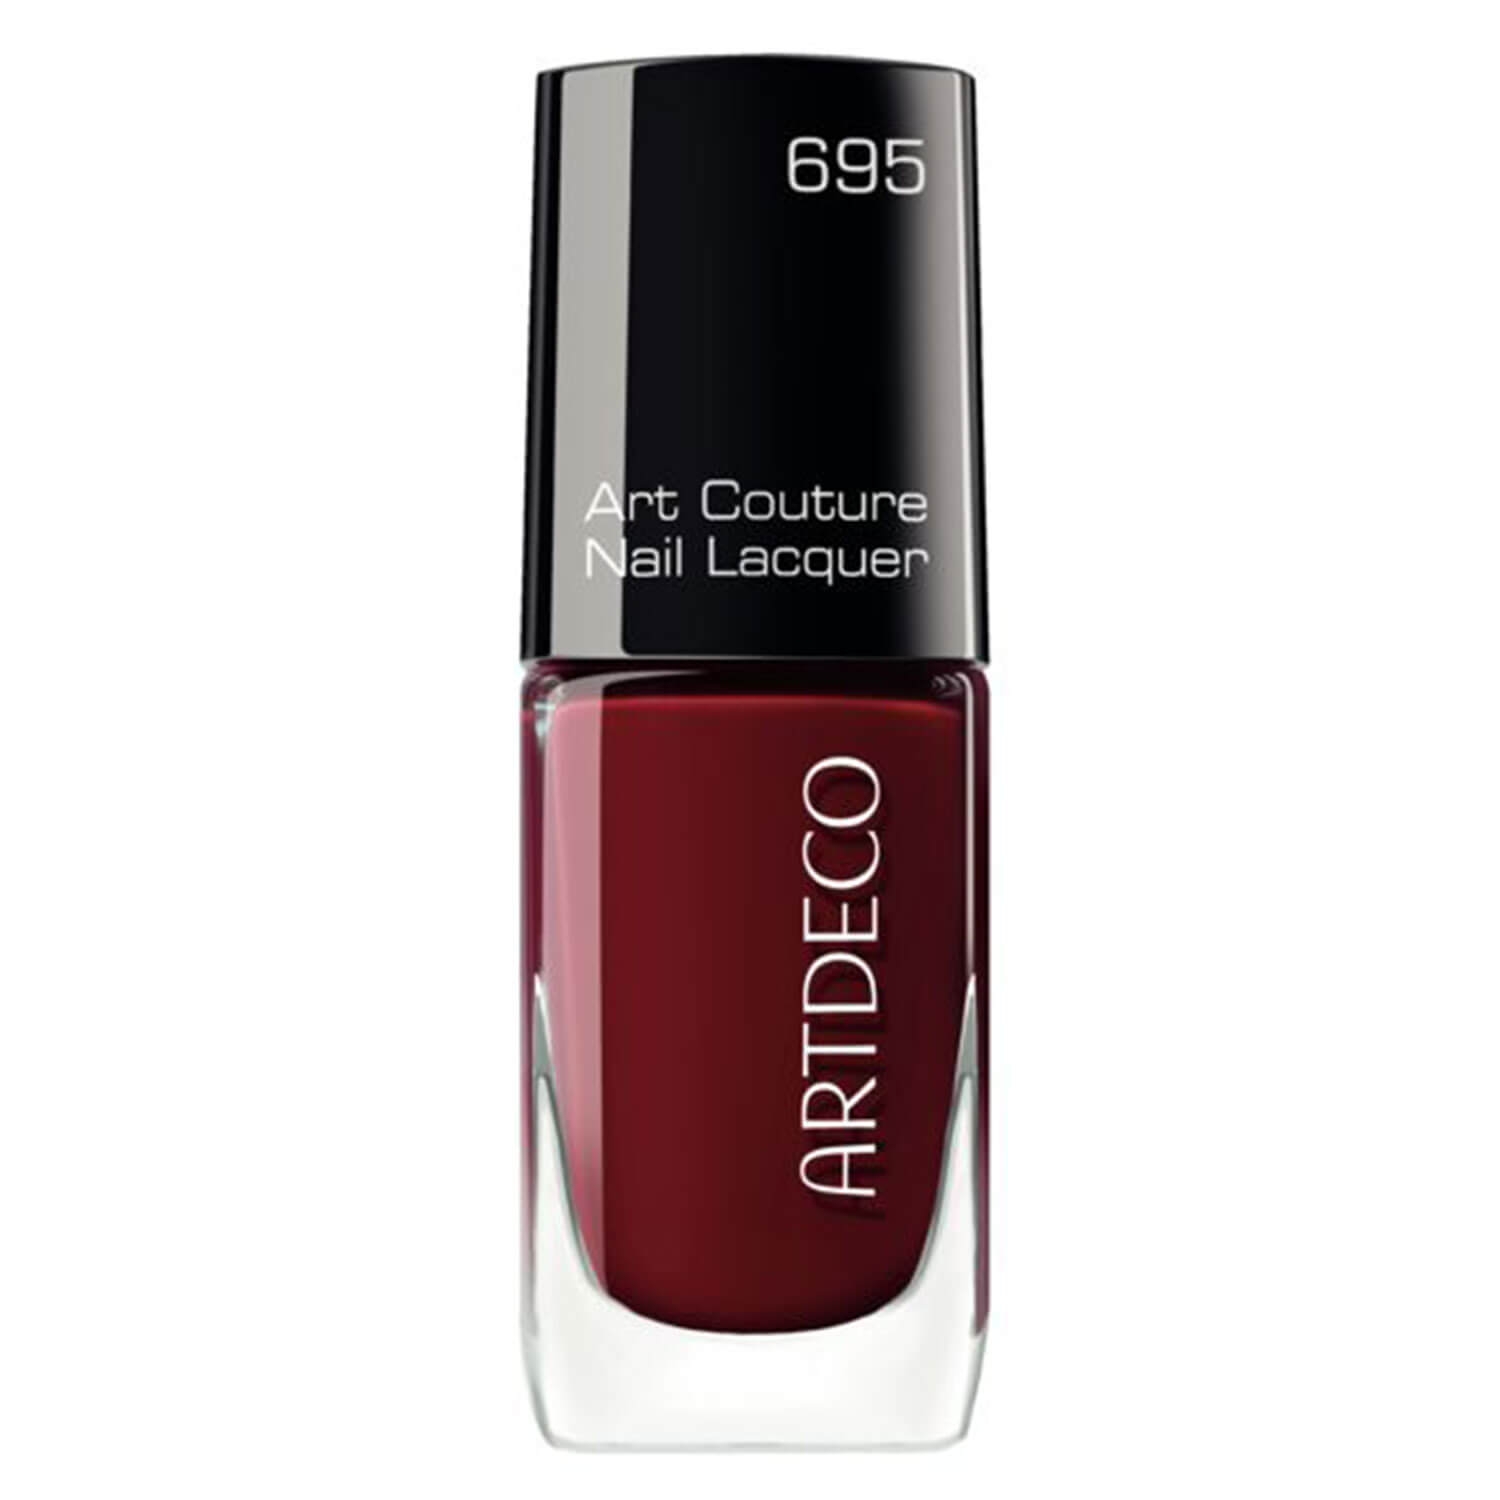 Product image from Art Couture - Nail Lacquer Blackberry 695